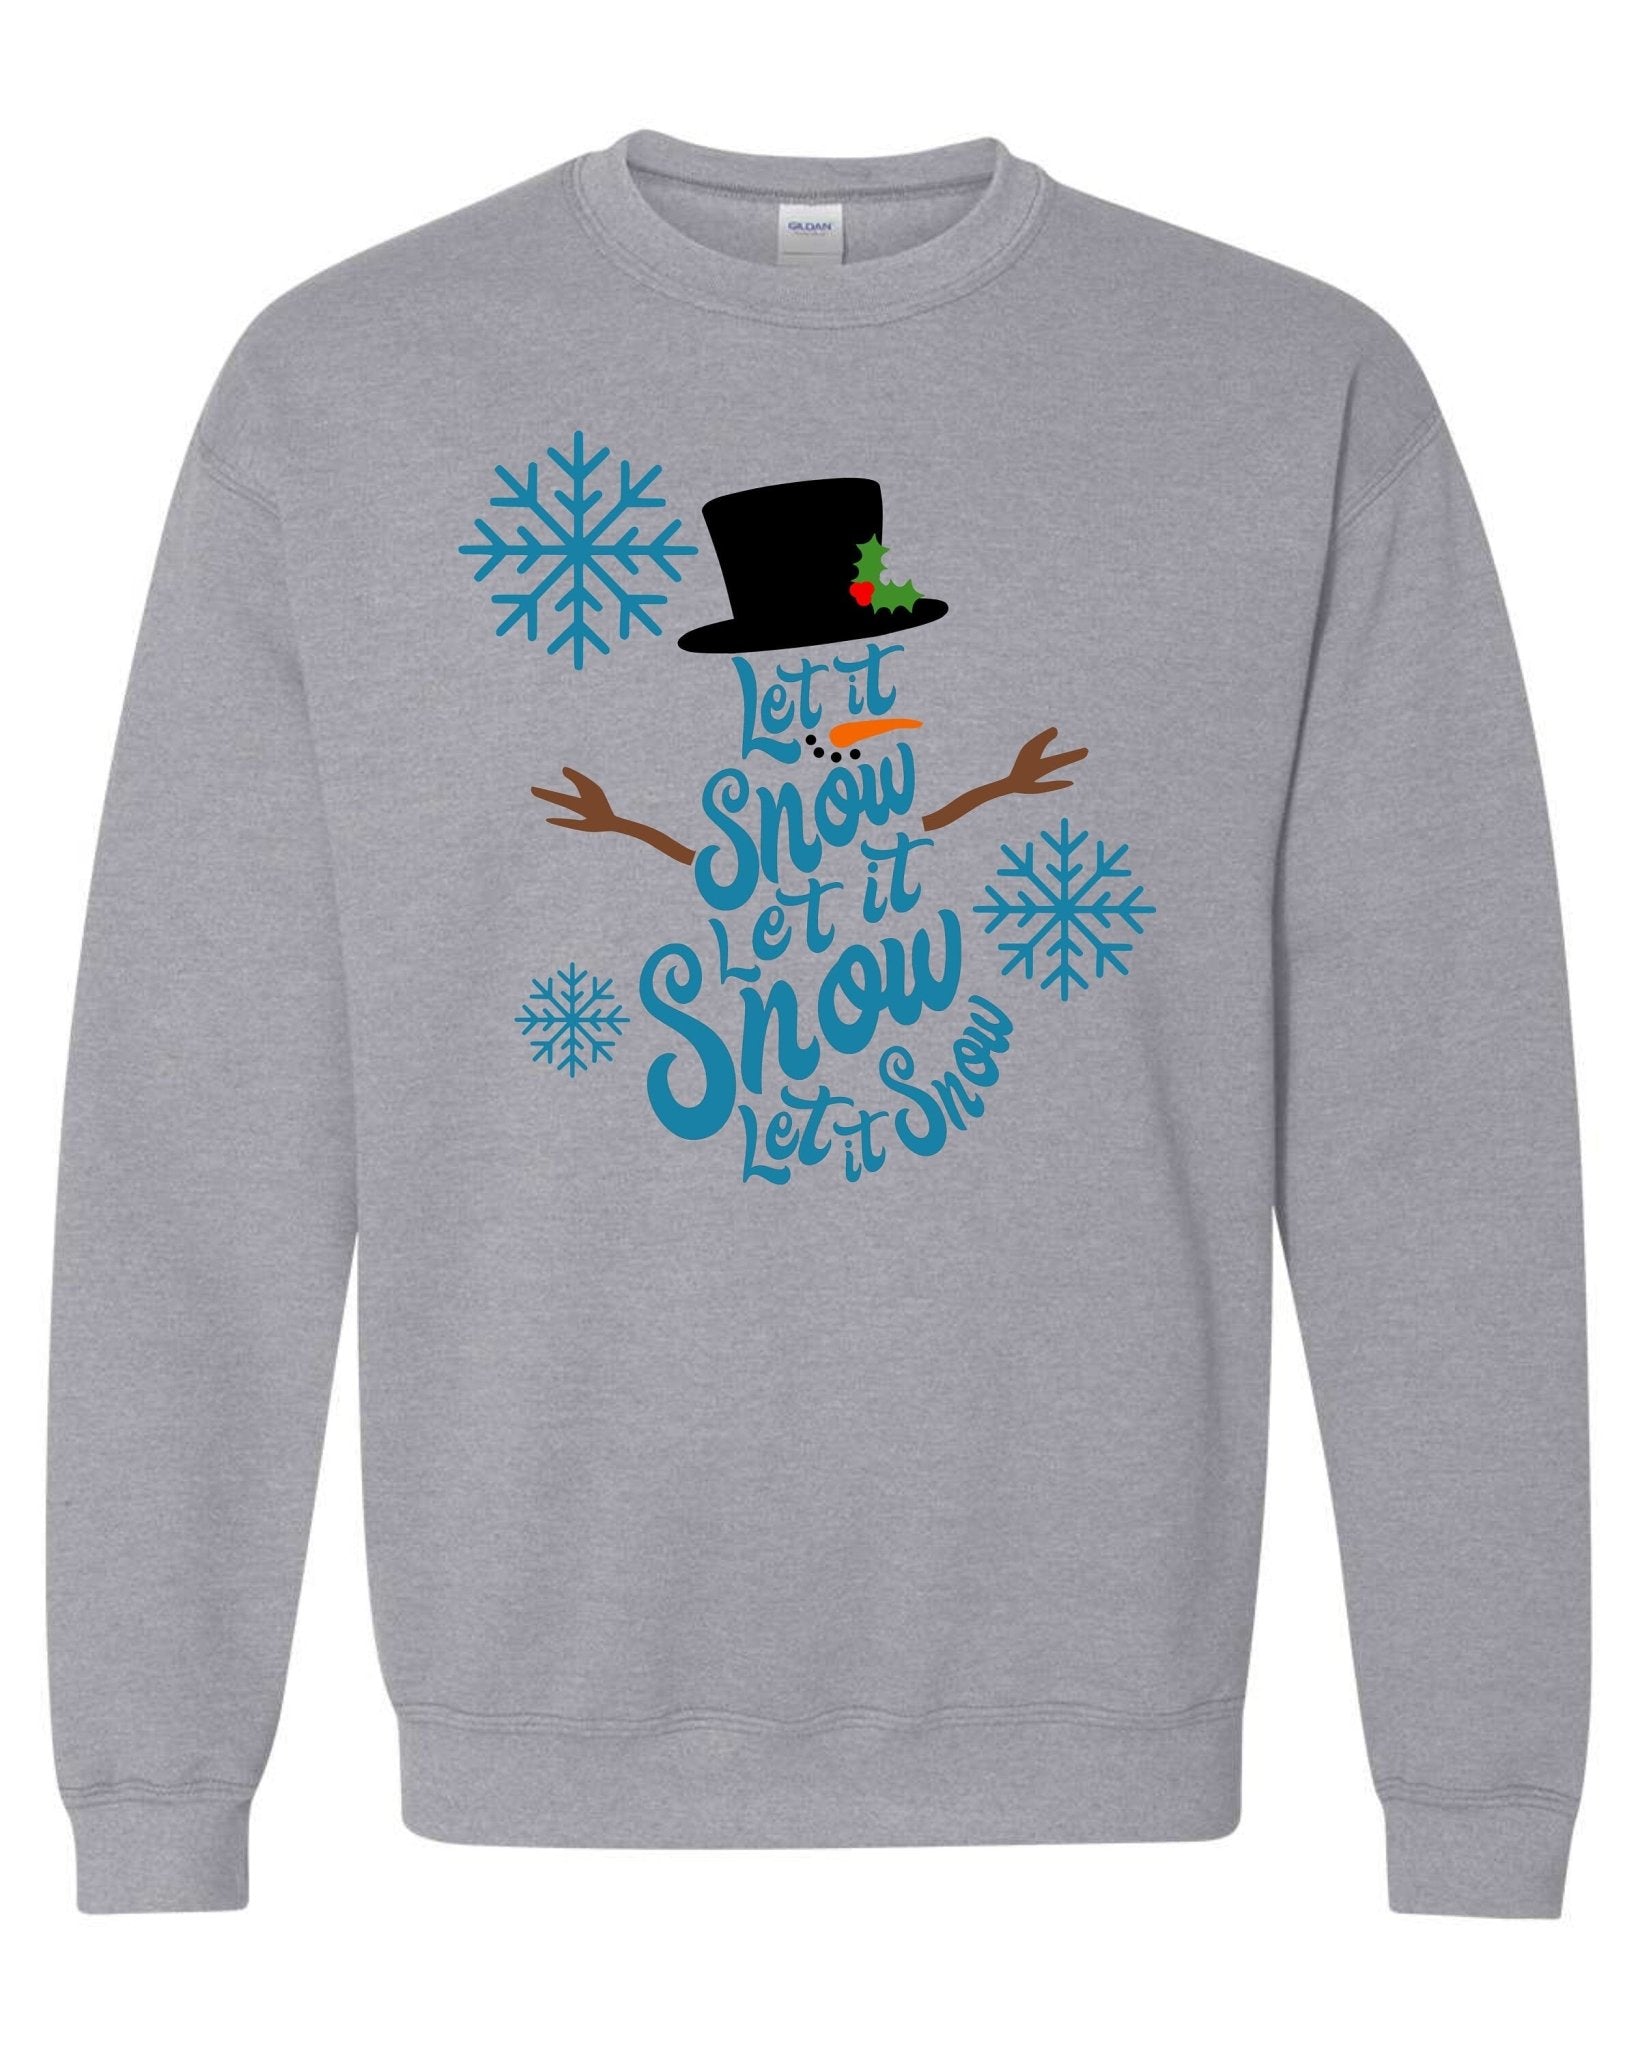 Let it snow Sweatshirt xmas sweatshirt winter christmas freezing cold gift for her mom mother in law step mom girlfriend always cold - SBS T Shop